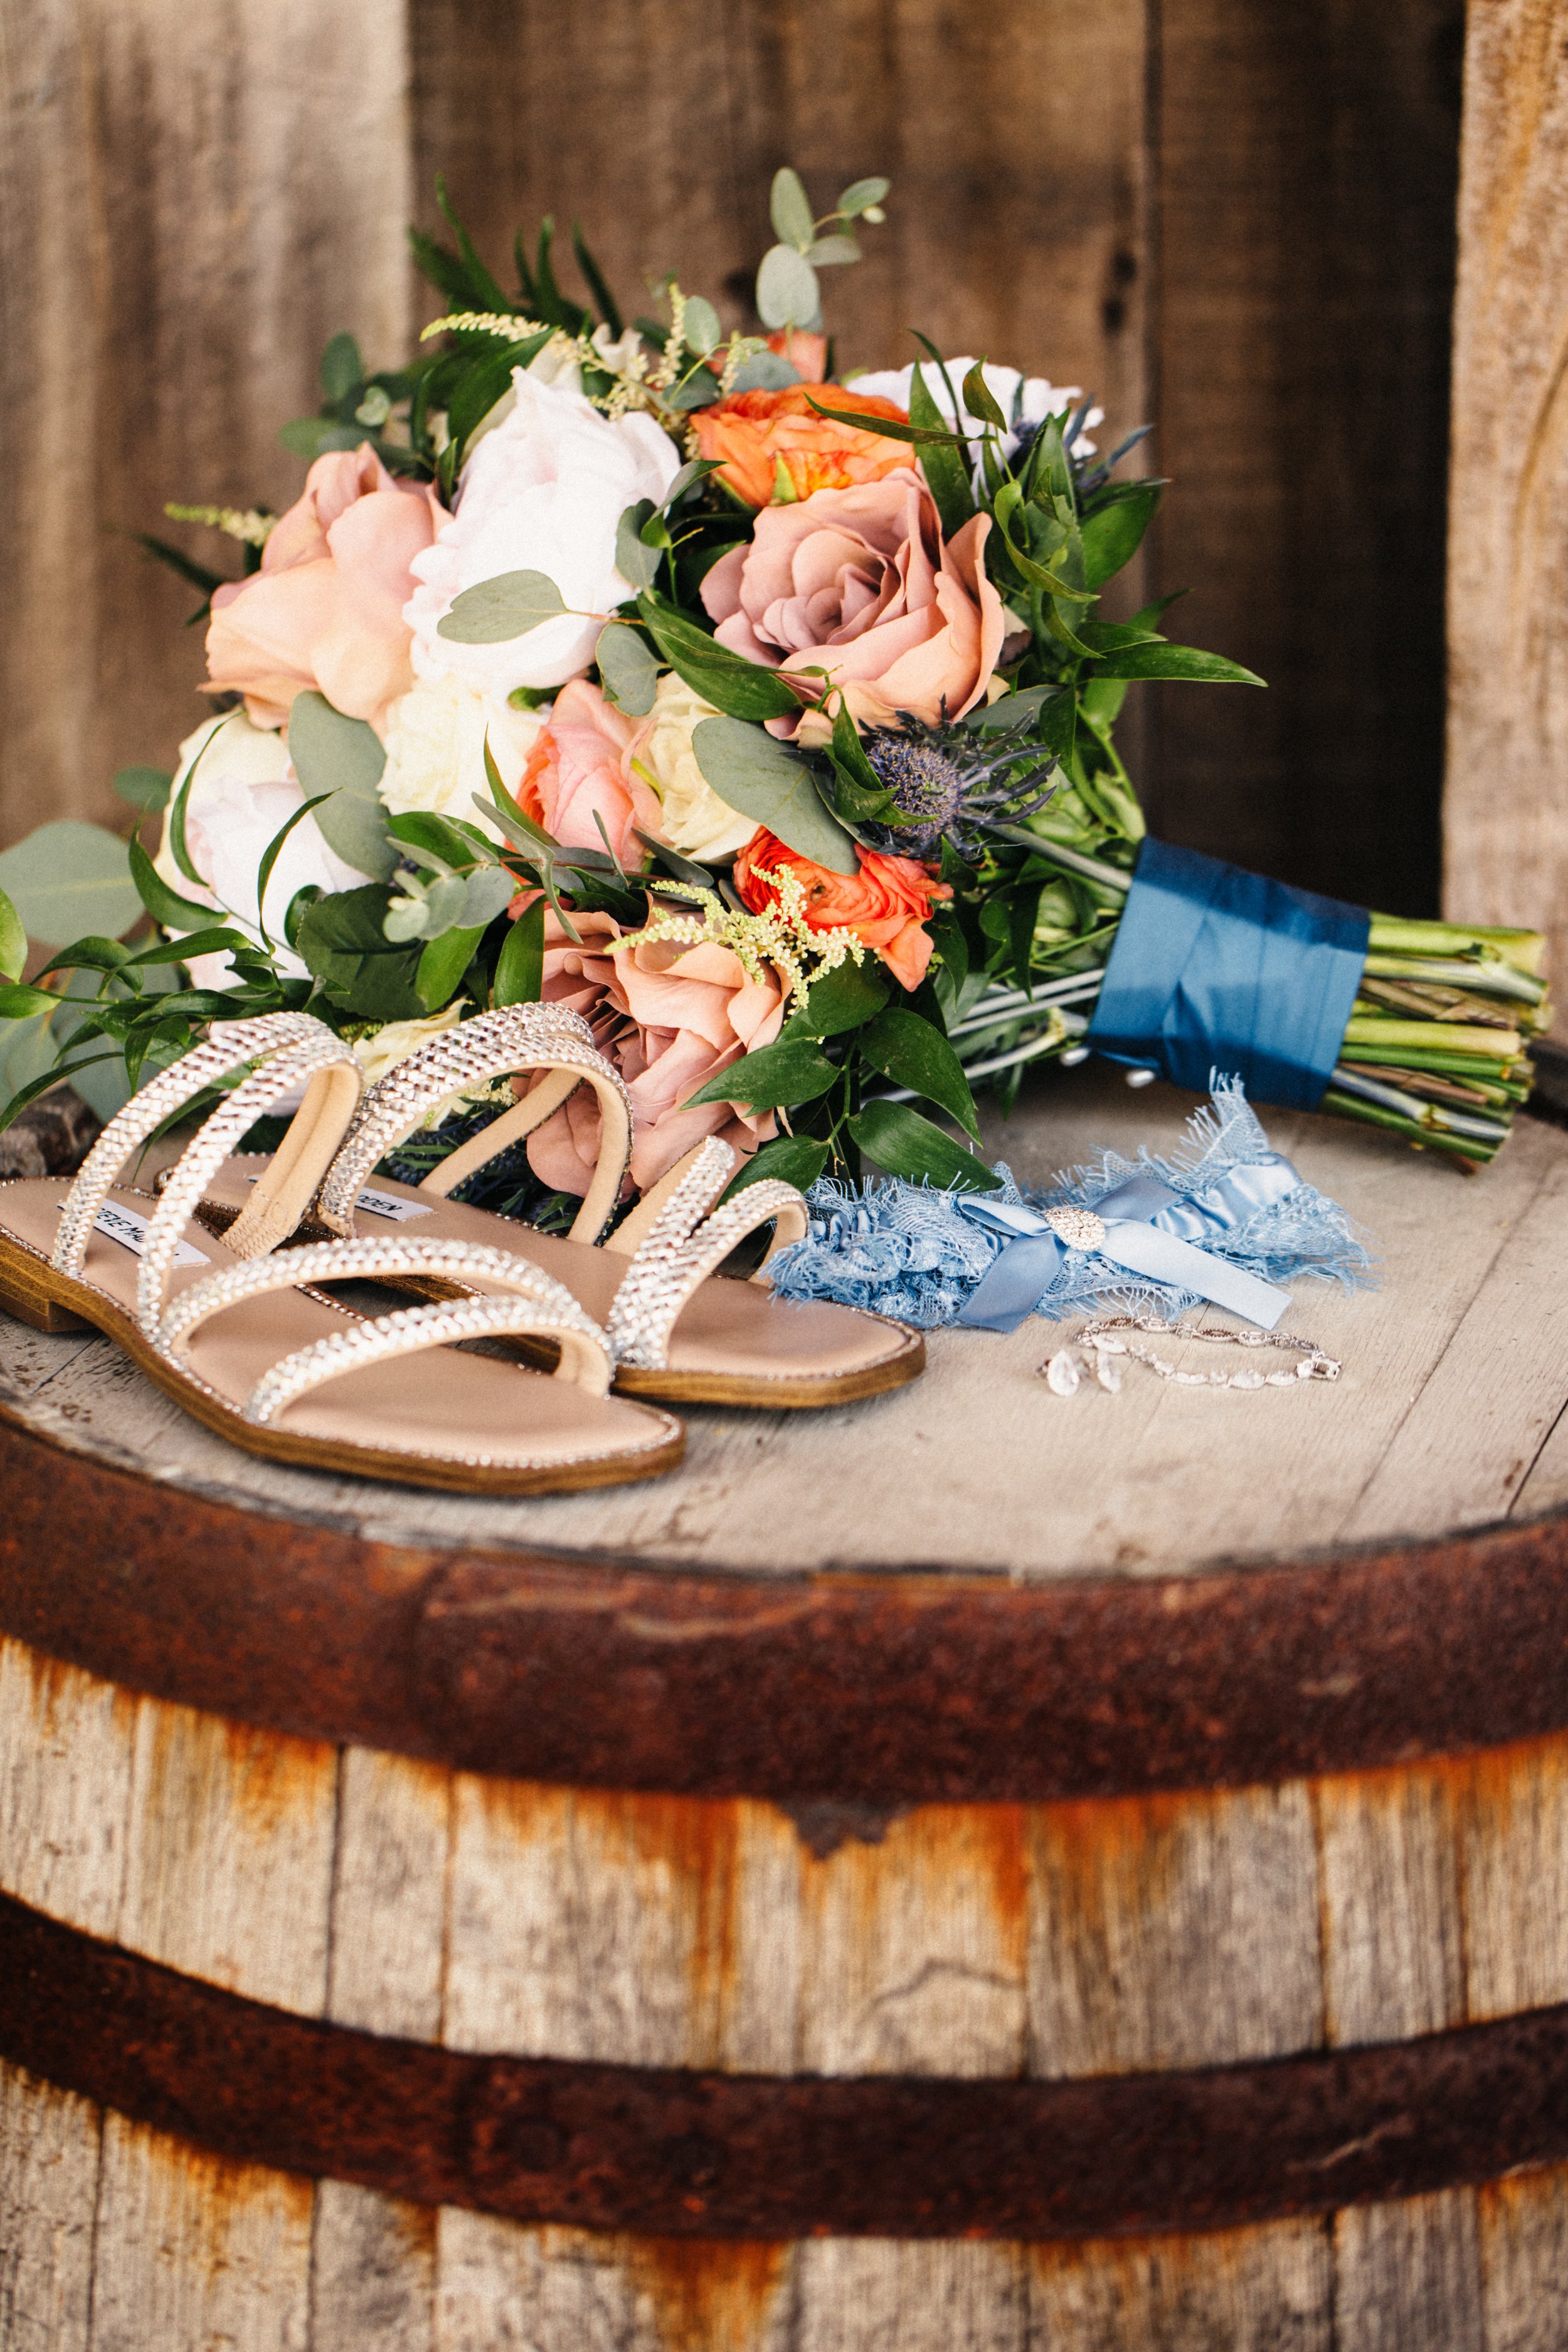  Southern wedding with a wooden barrel with the bride's shoes and bridal bouquet by Teala Ward Photography. Southern Belle Wedding Country #TealaWardPhotography #IllinoisValleyPhotographer #summerwedding #TealaWardWeddings #Illinoisweddings  